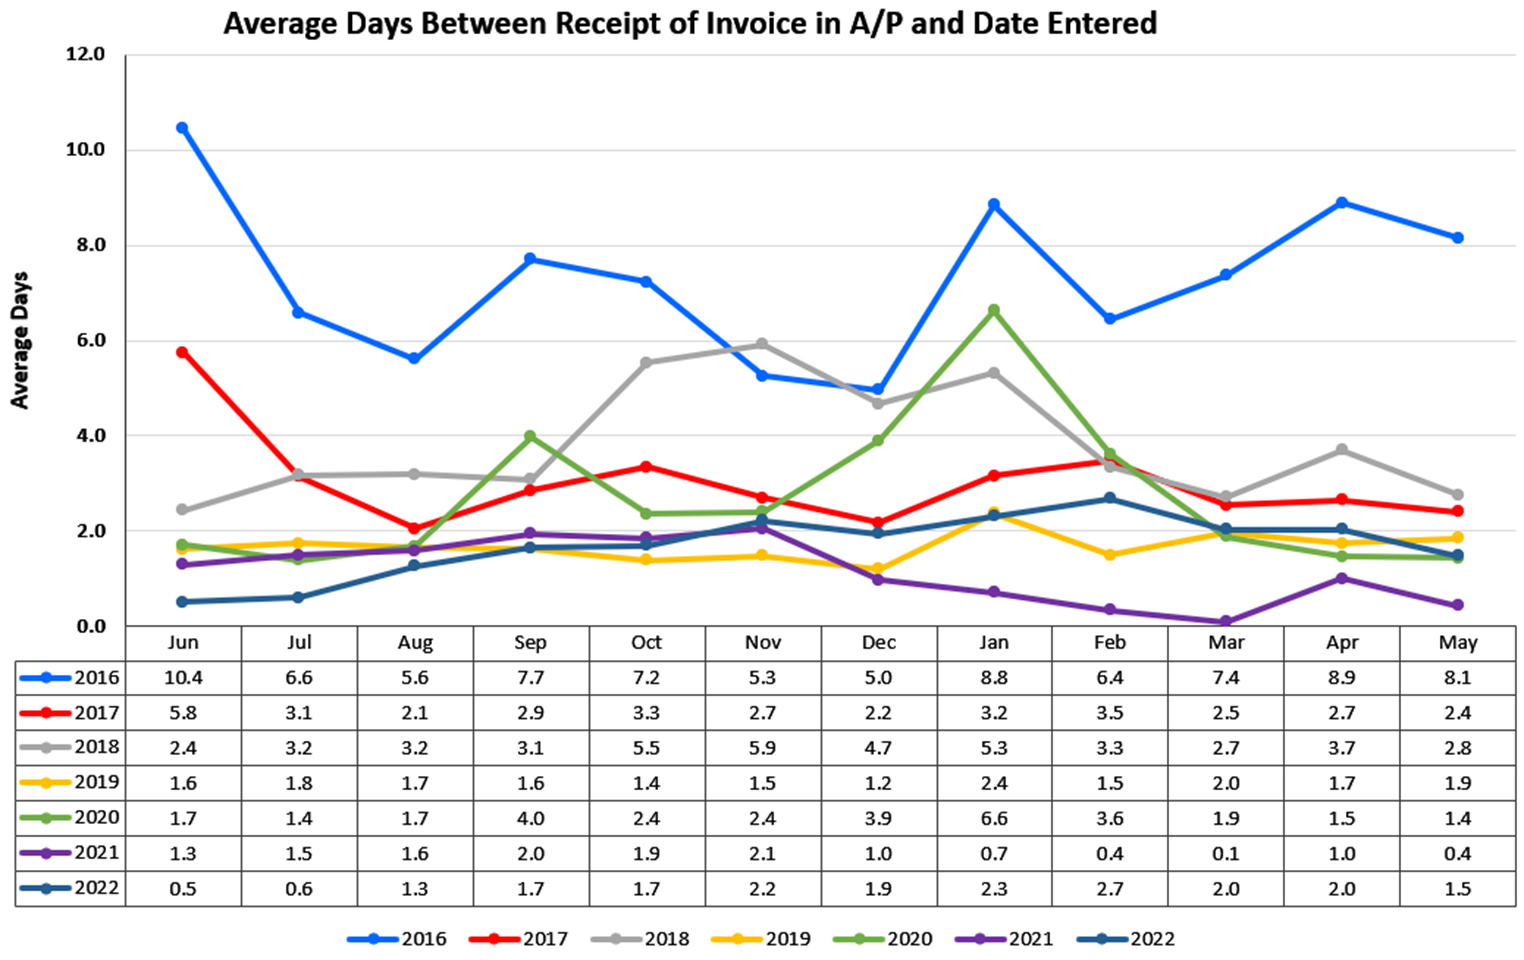 Average Days Between Receipt of Invoice in A/P and Date Entered